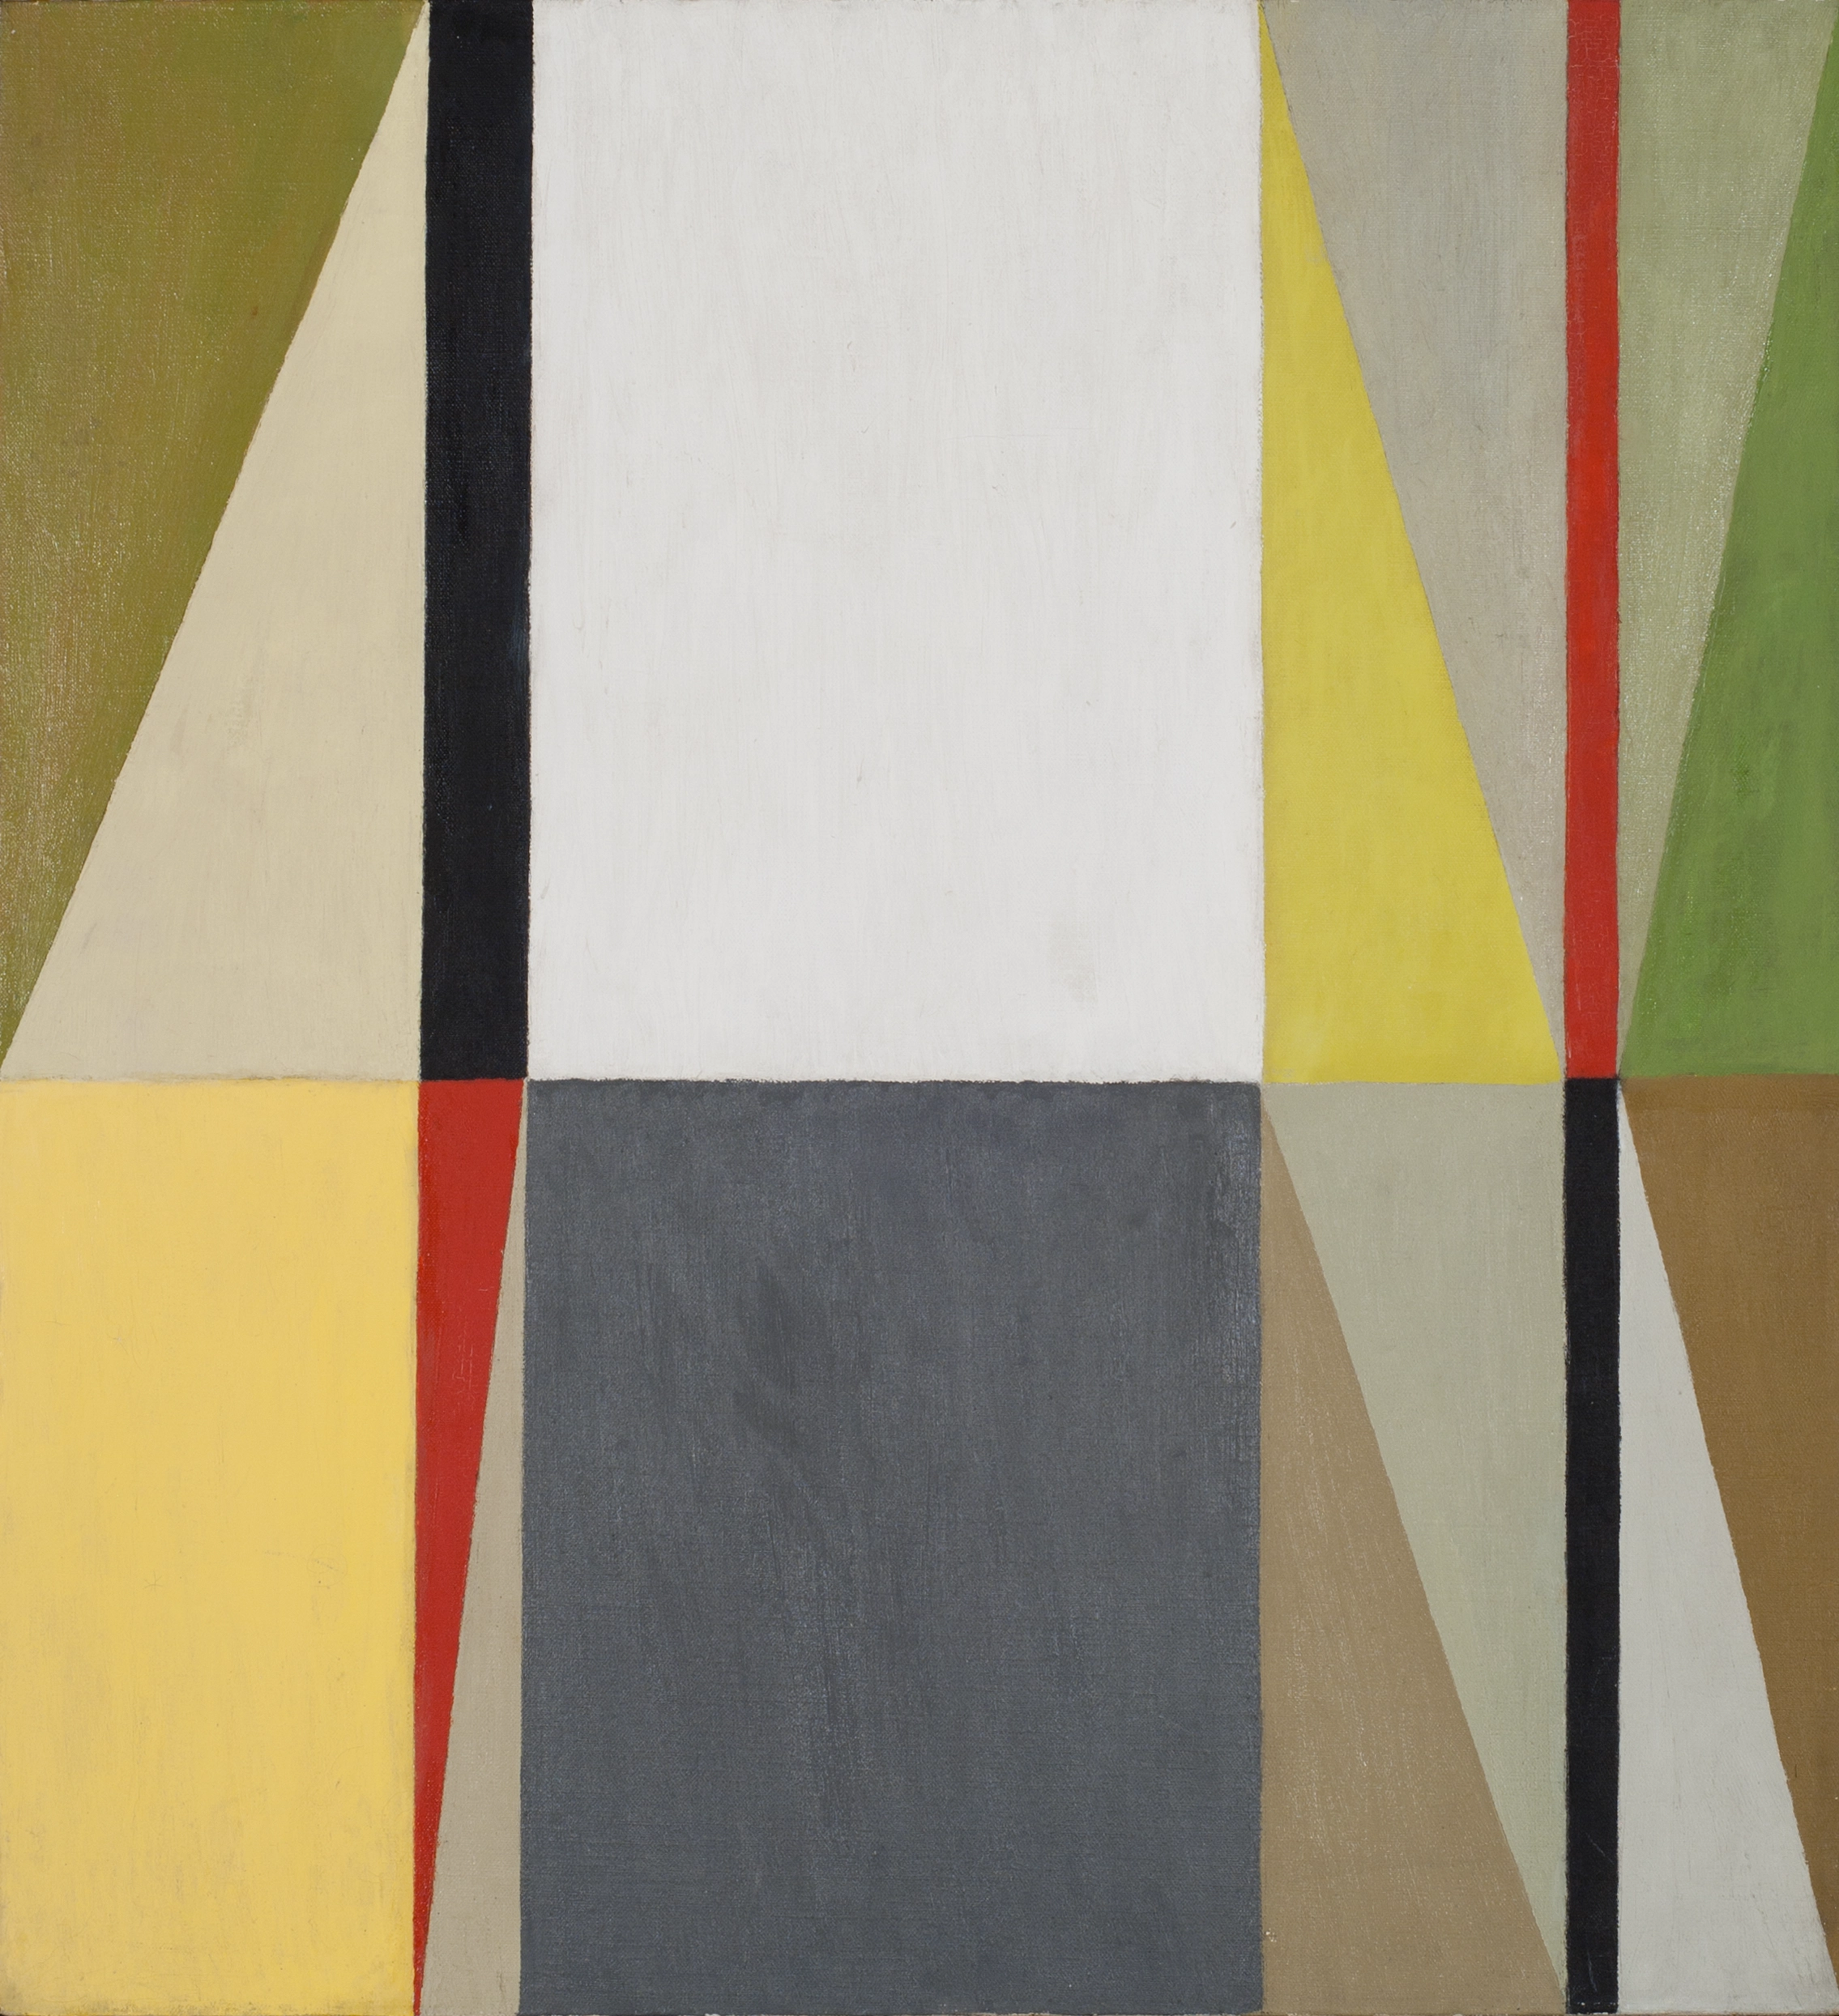 Abstract oil on canvas painting, comprised of yellow, white, grey, green, and brown triangles and squares, as well as thin black and red rectangles, These forms are blocked together and create a grid-like composition.